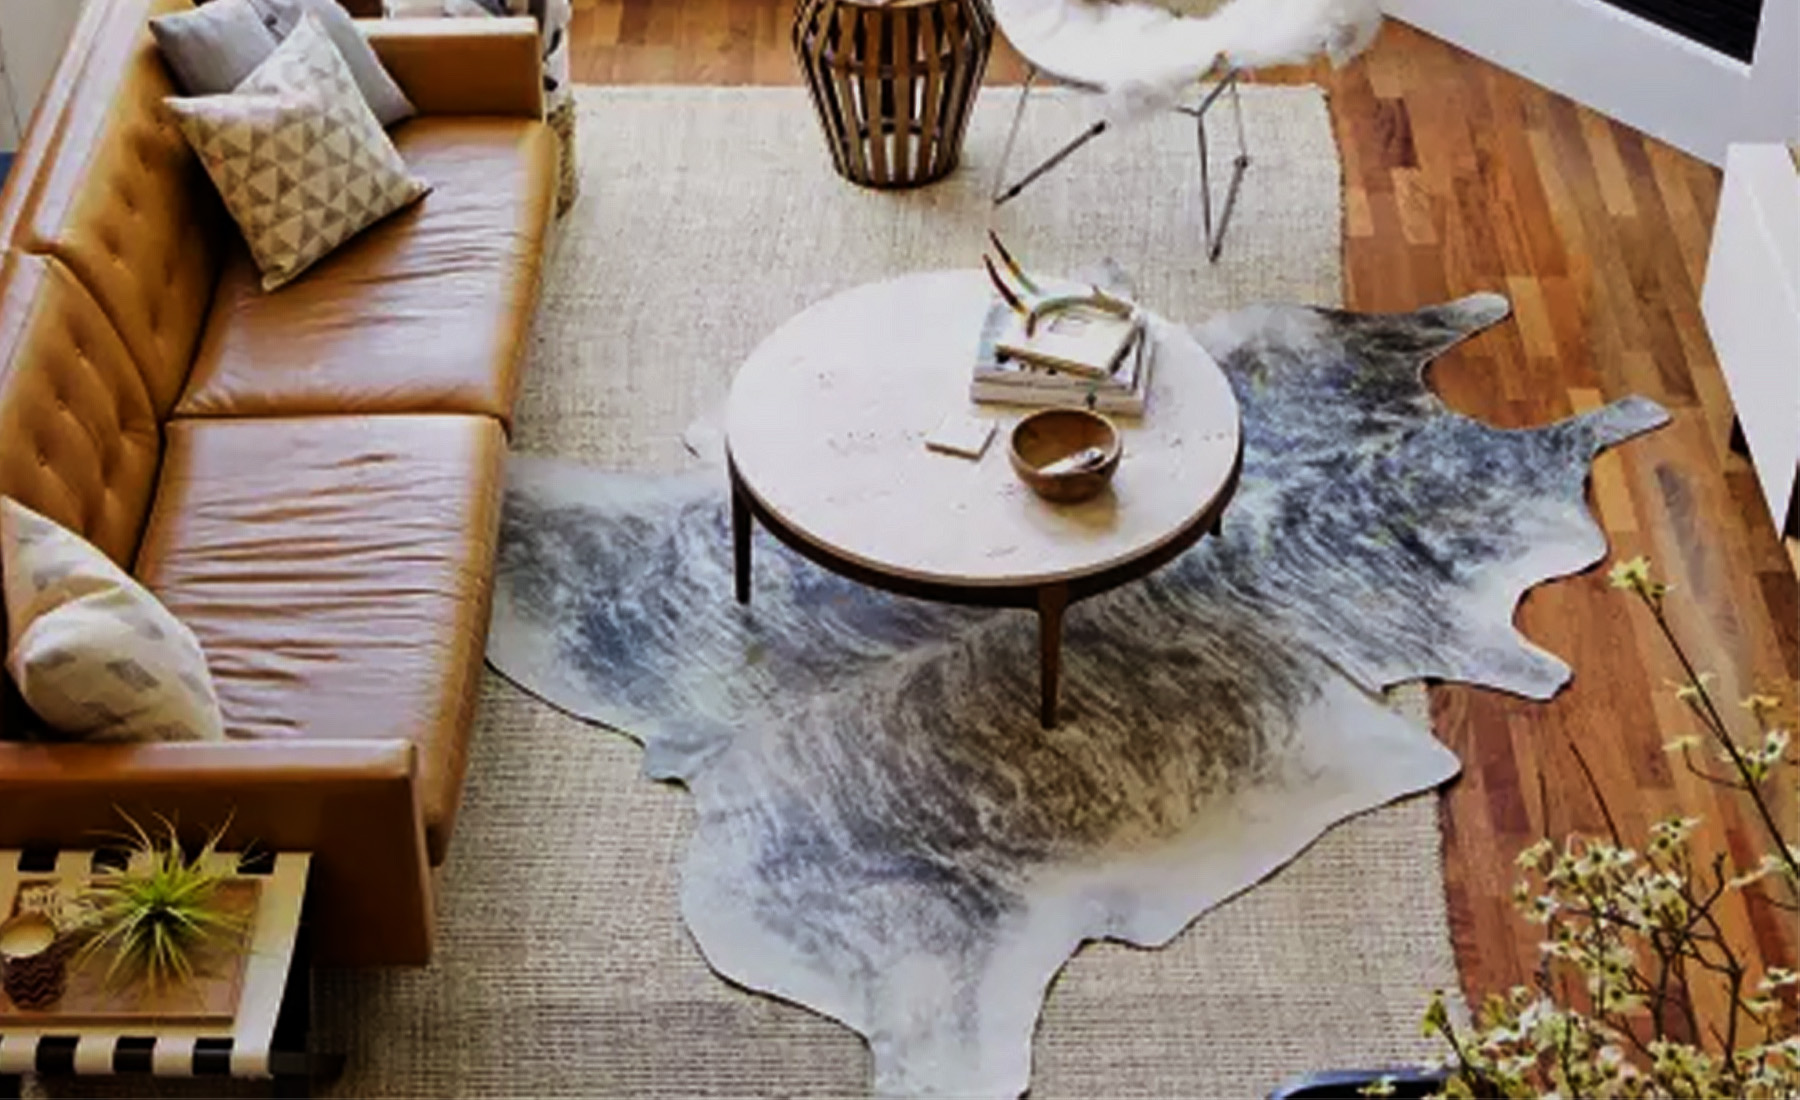 Play with Scale: Use rugs of different scales to create visual contrast. For instance, you can layer a large bottom rug to anchor the scheme and then layer vintage Persians or sheepskins on top.